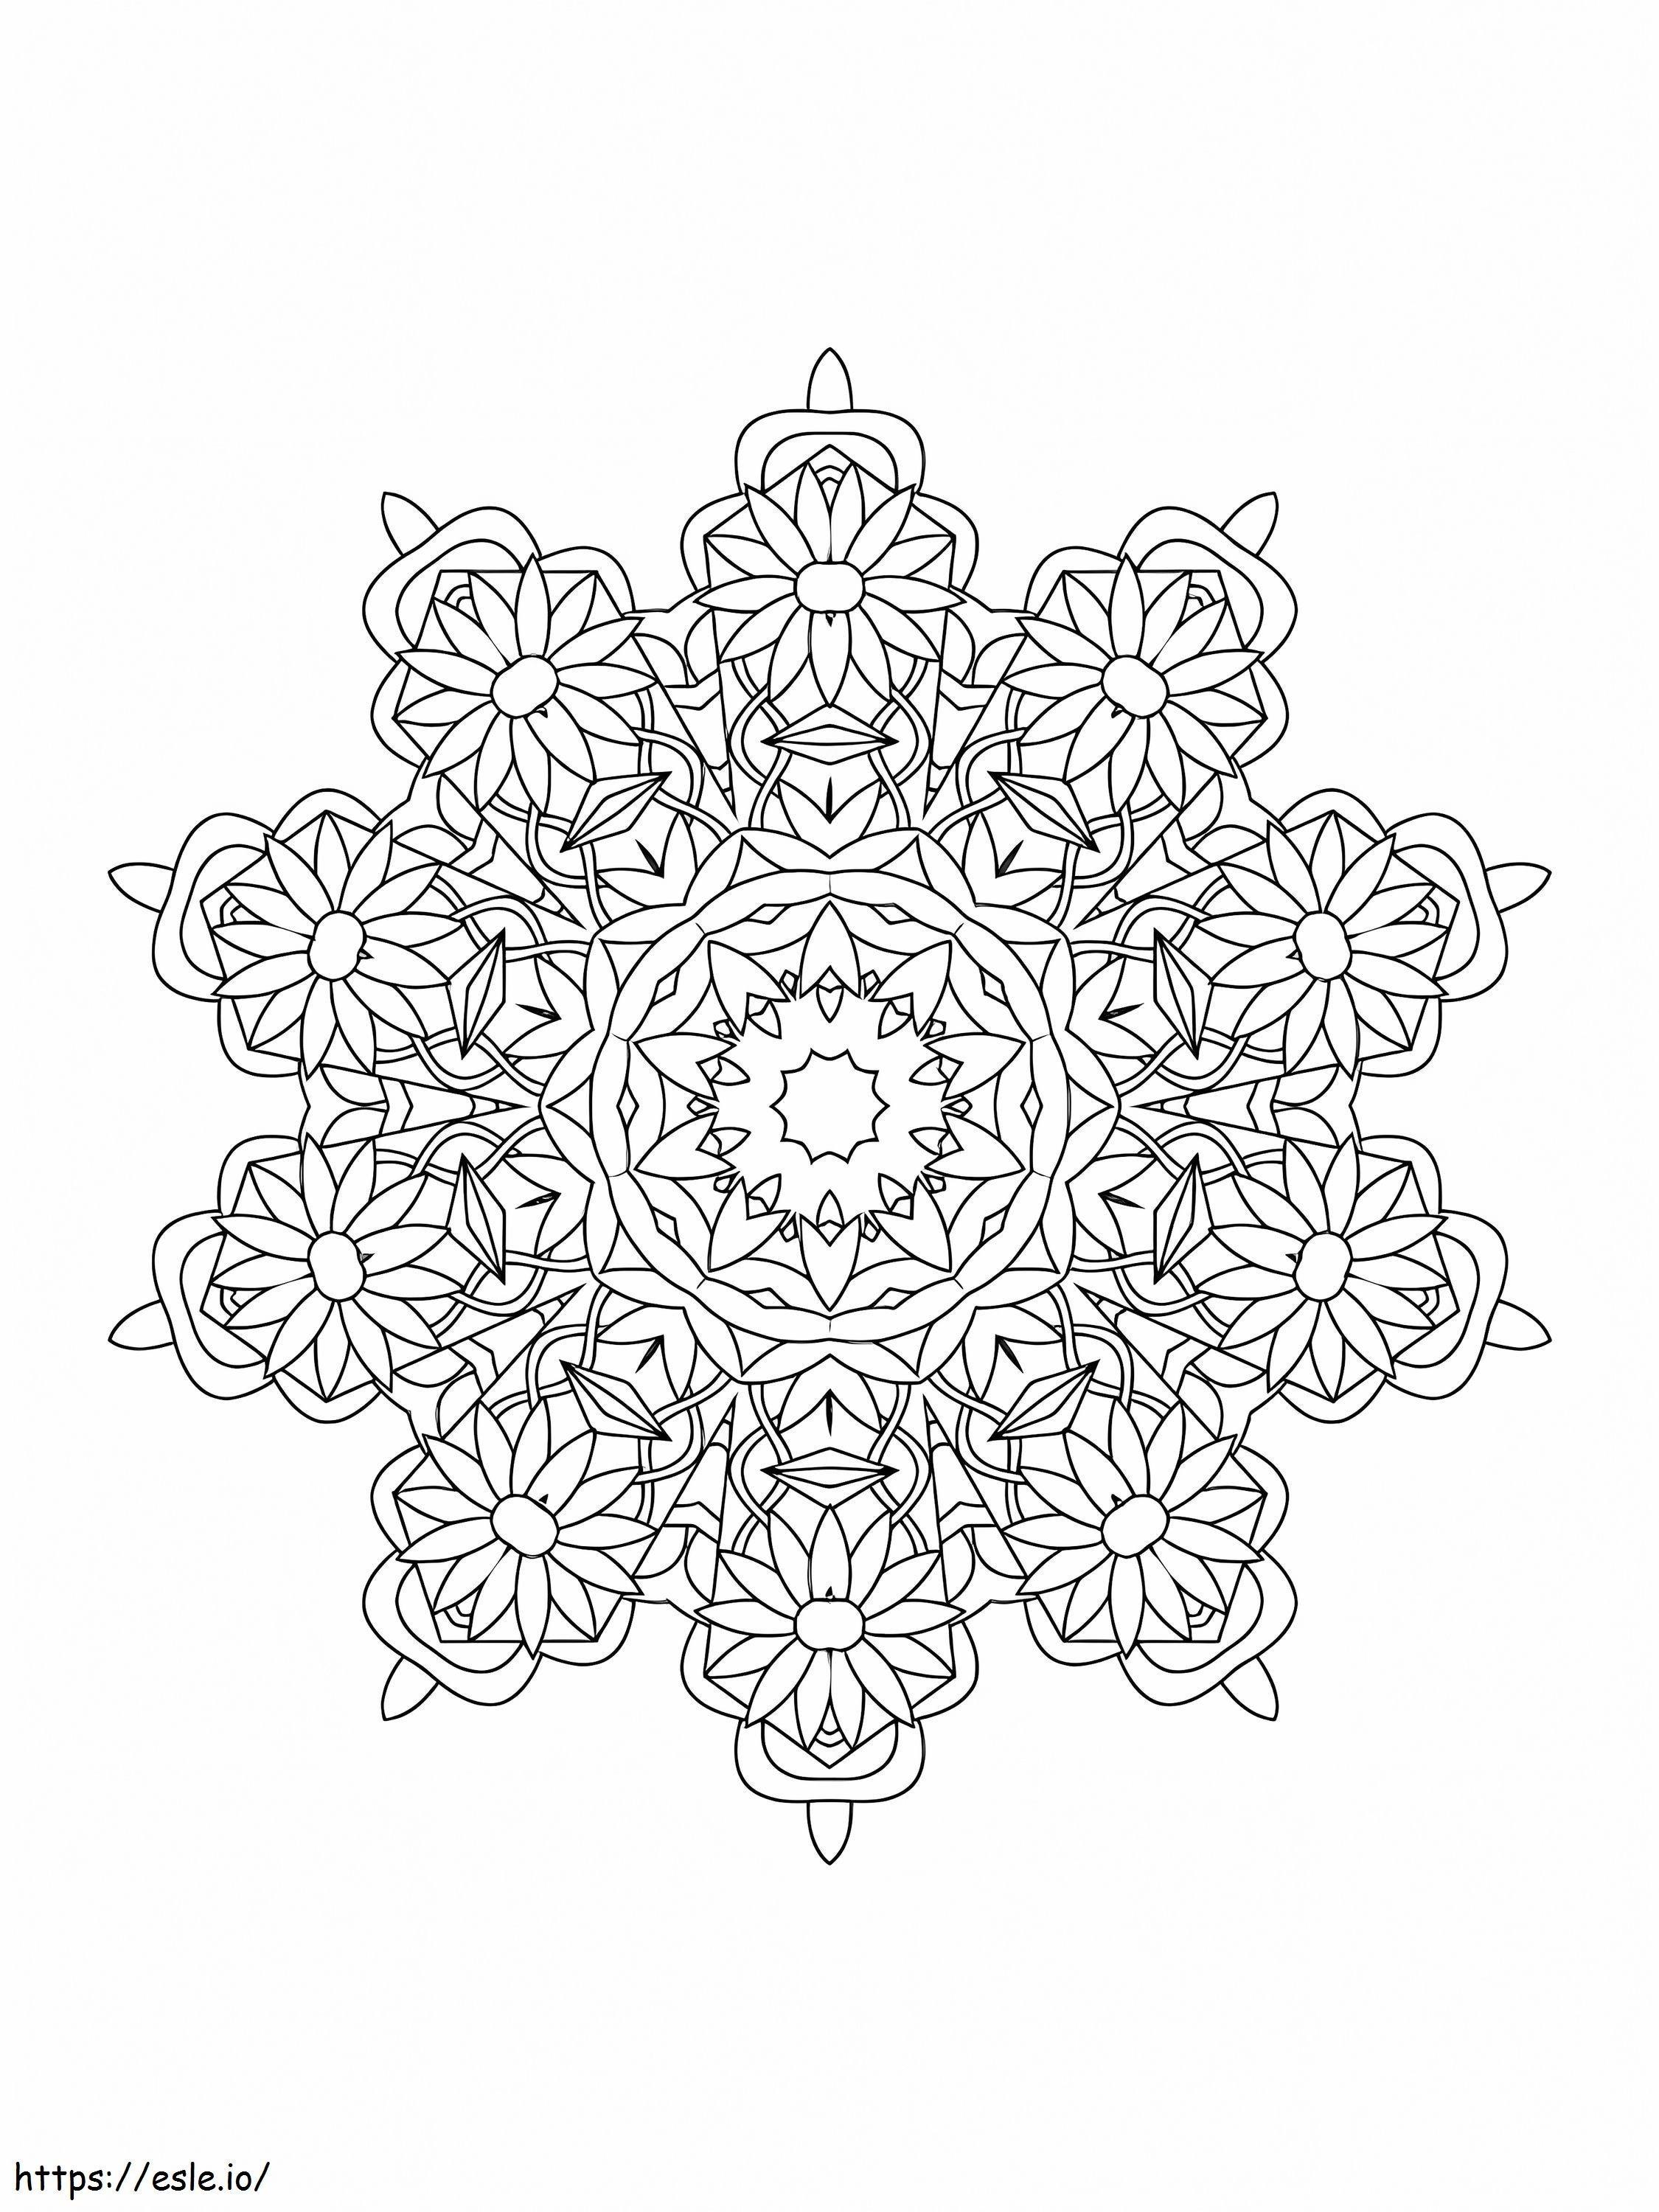 Kaleidoscope 9 coloring page